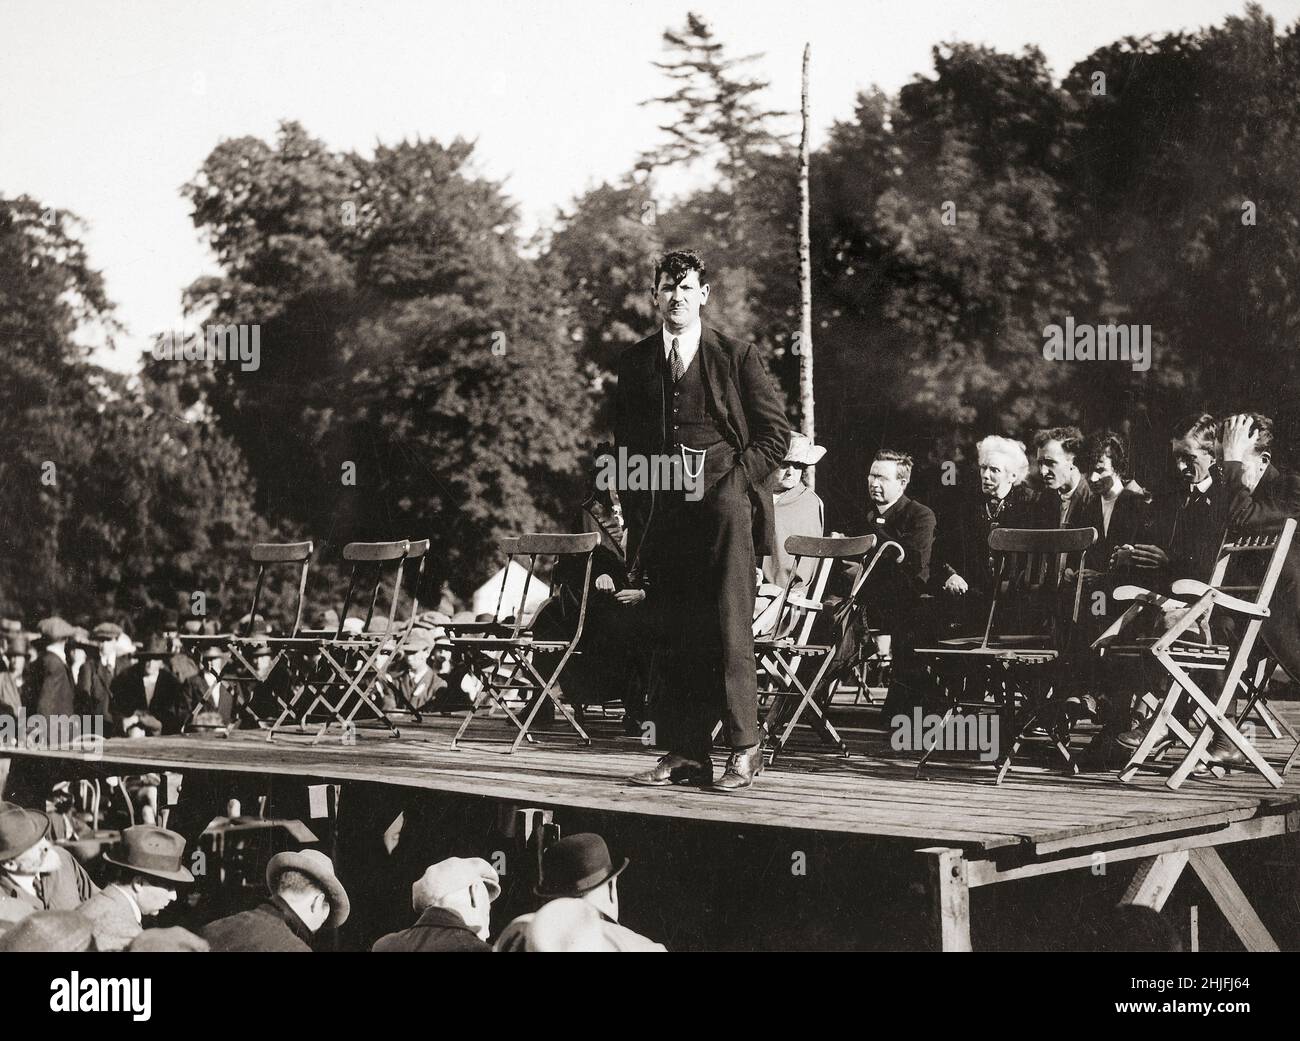 A vintage photograph of Michael Collins (1890-1922), Irish revolutionary, soldier and politician who was a leading figure in the early-20th century struggle for Irish independence speaking in Armagh in 1921. He was Chairman of the Provisional Government of the Irish Free State from January 1922, and commander-in-chief of the National Army from July until his death in an ambush in August 1922, during the Civil War. Stock Photo